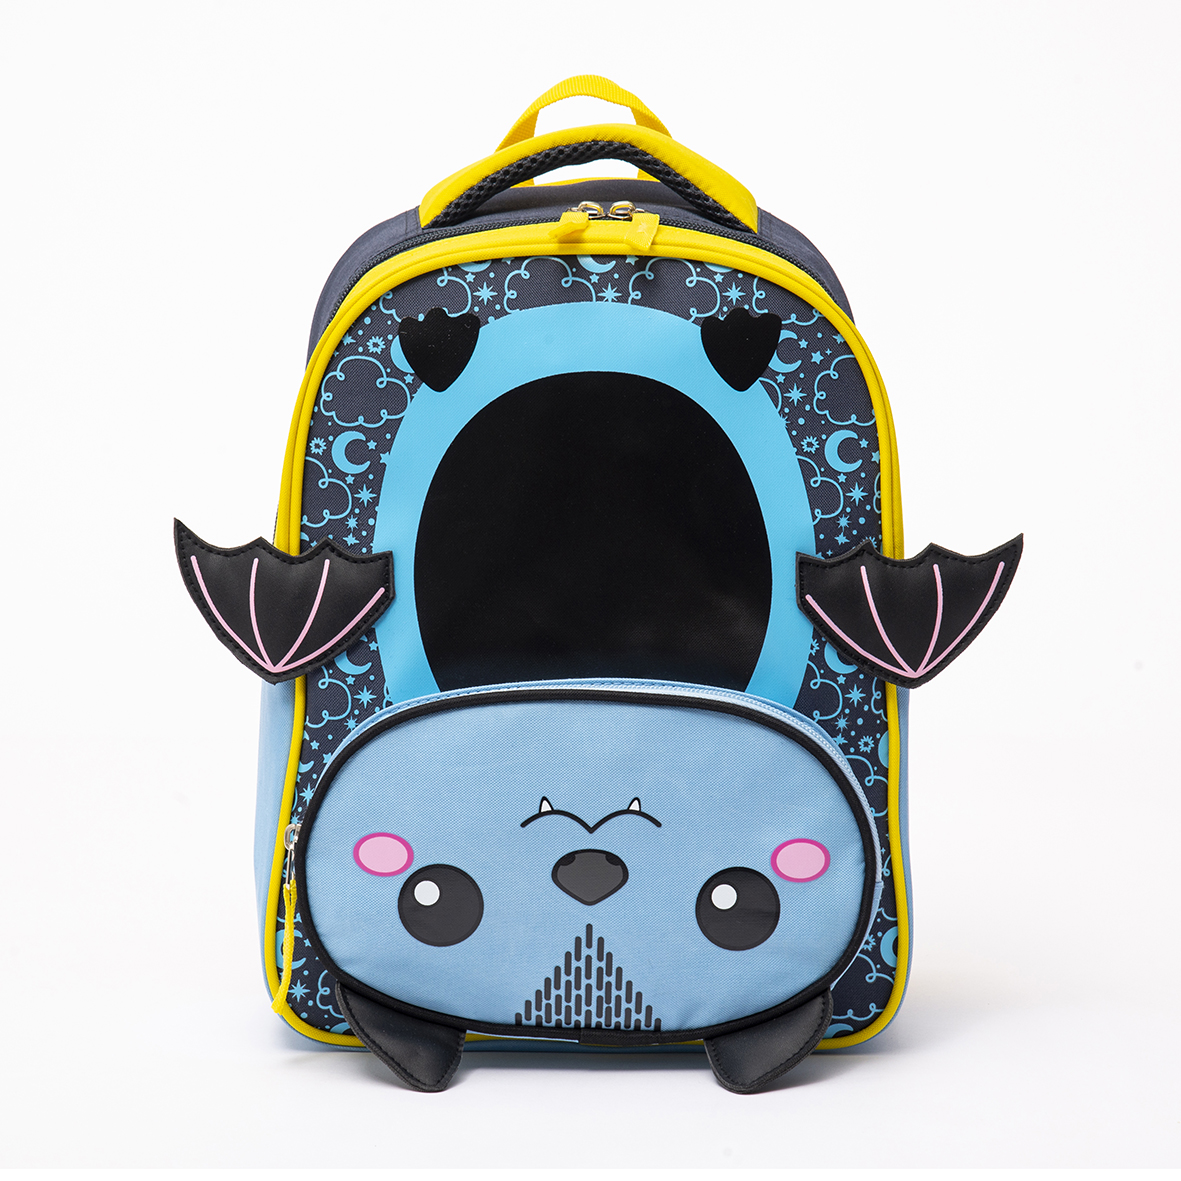 Manufacturer of Multi-Function Baby Nappy Storage Bag - New design cute stereoscopic blue bat kids bag – Twinkling Star